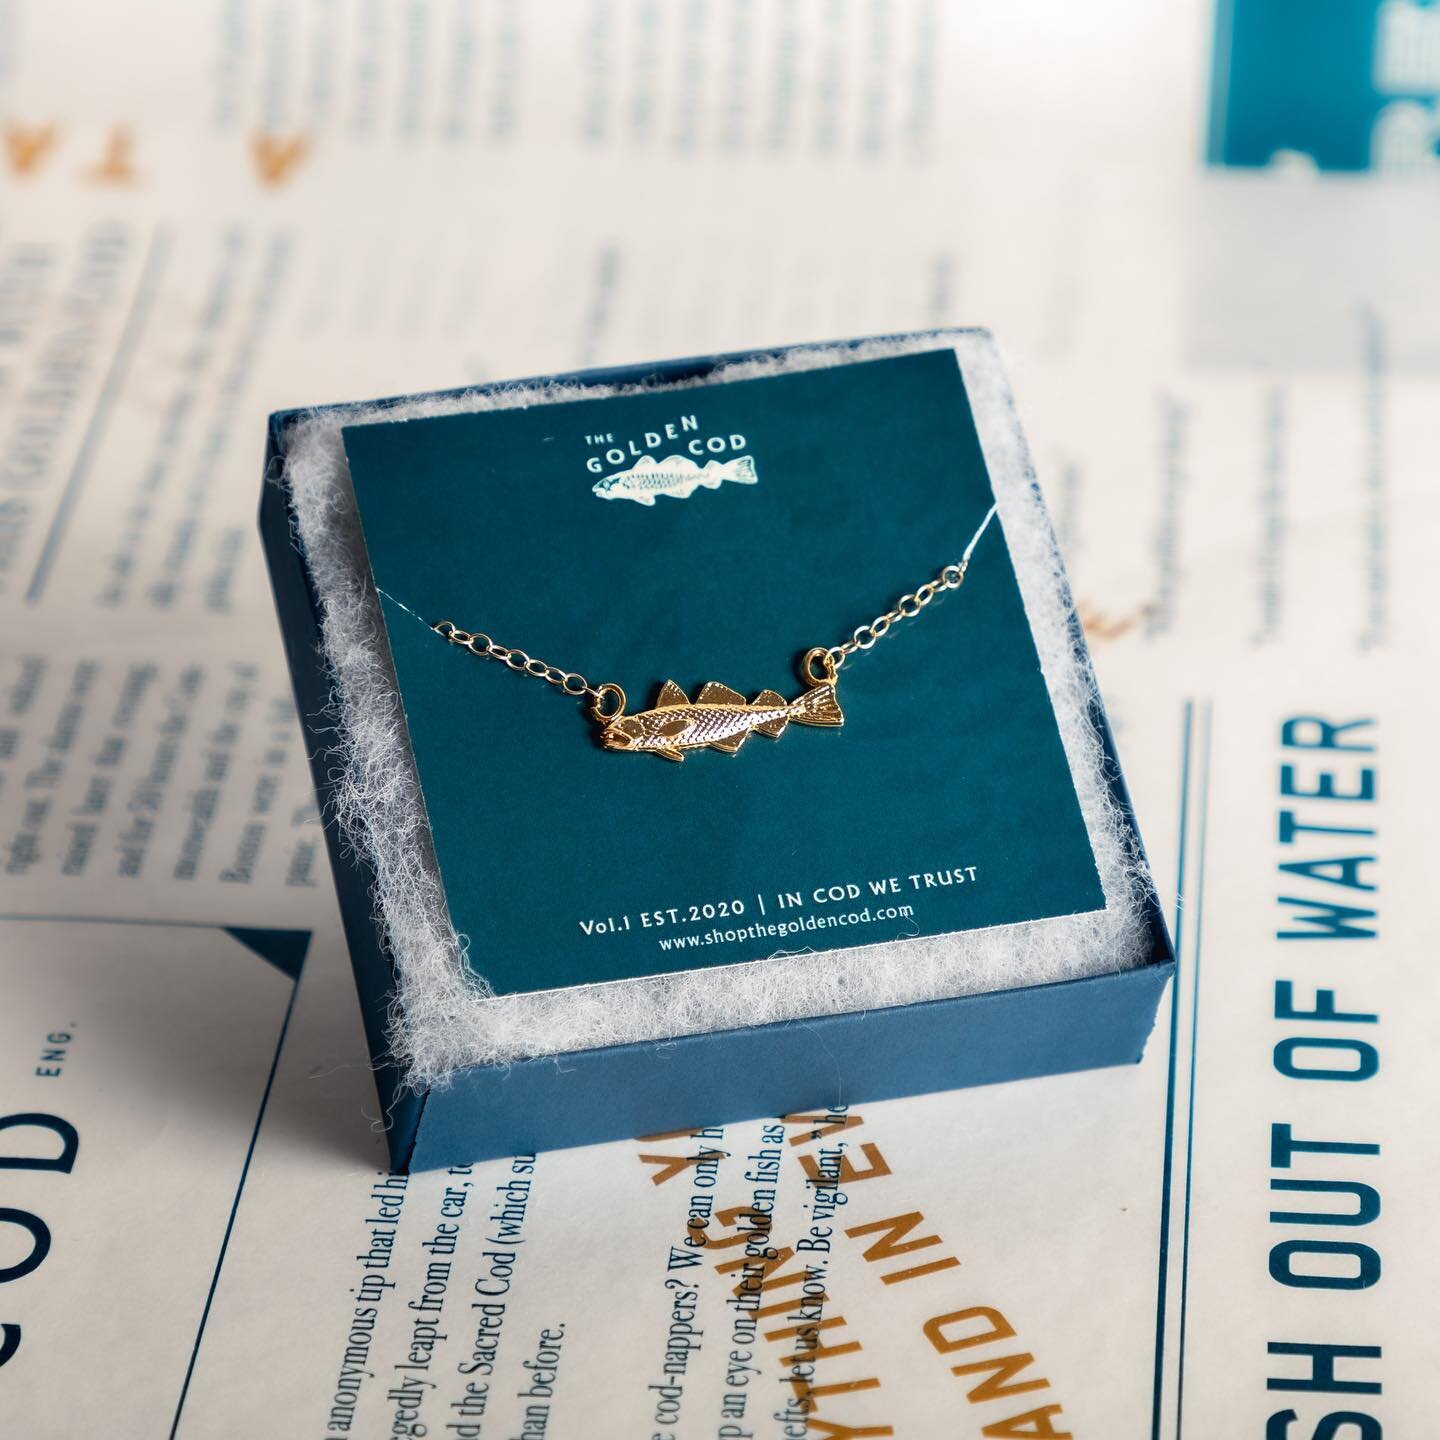 The Golden Cod &mdash; now available at joye and just in time for Mother&rsquo;s Day gift-giving! 

The Golden Cod was launched during the pandemic by Scituate-based wife-and-husband team Robbin and Jeff Mangano.

These beautiful necklaces celebrate 